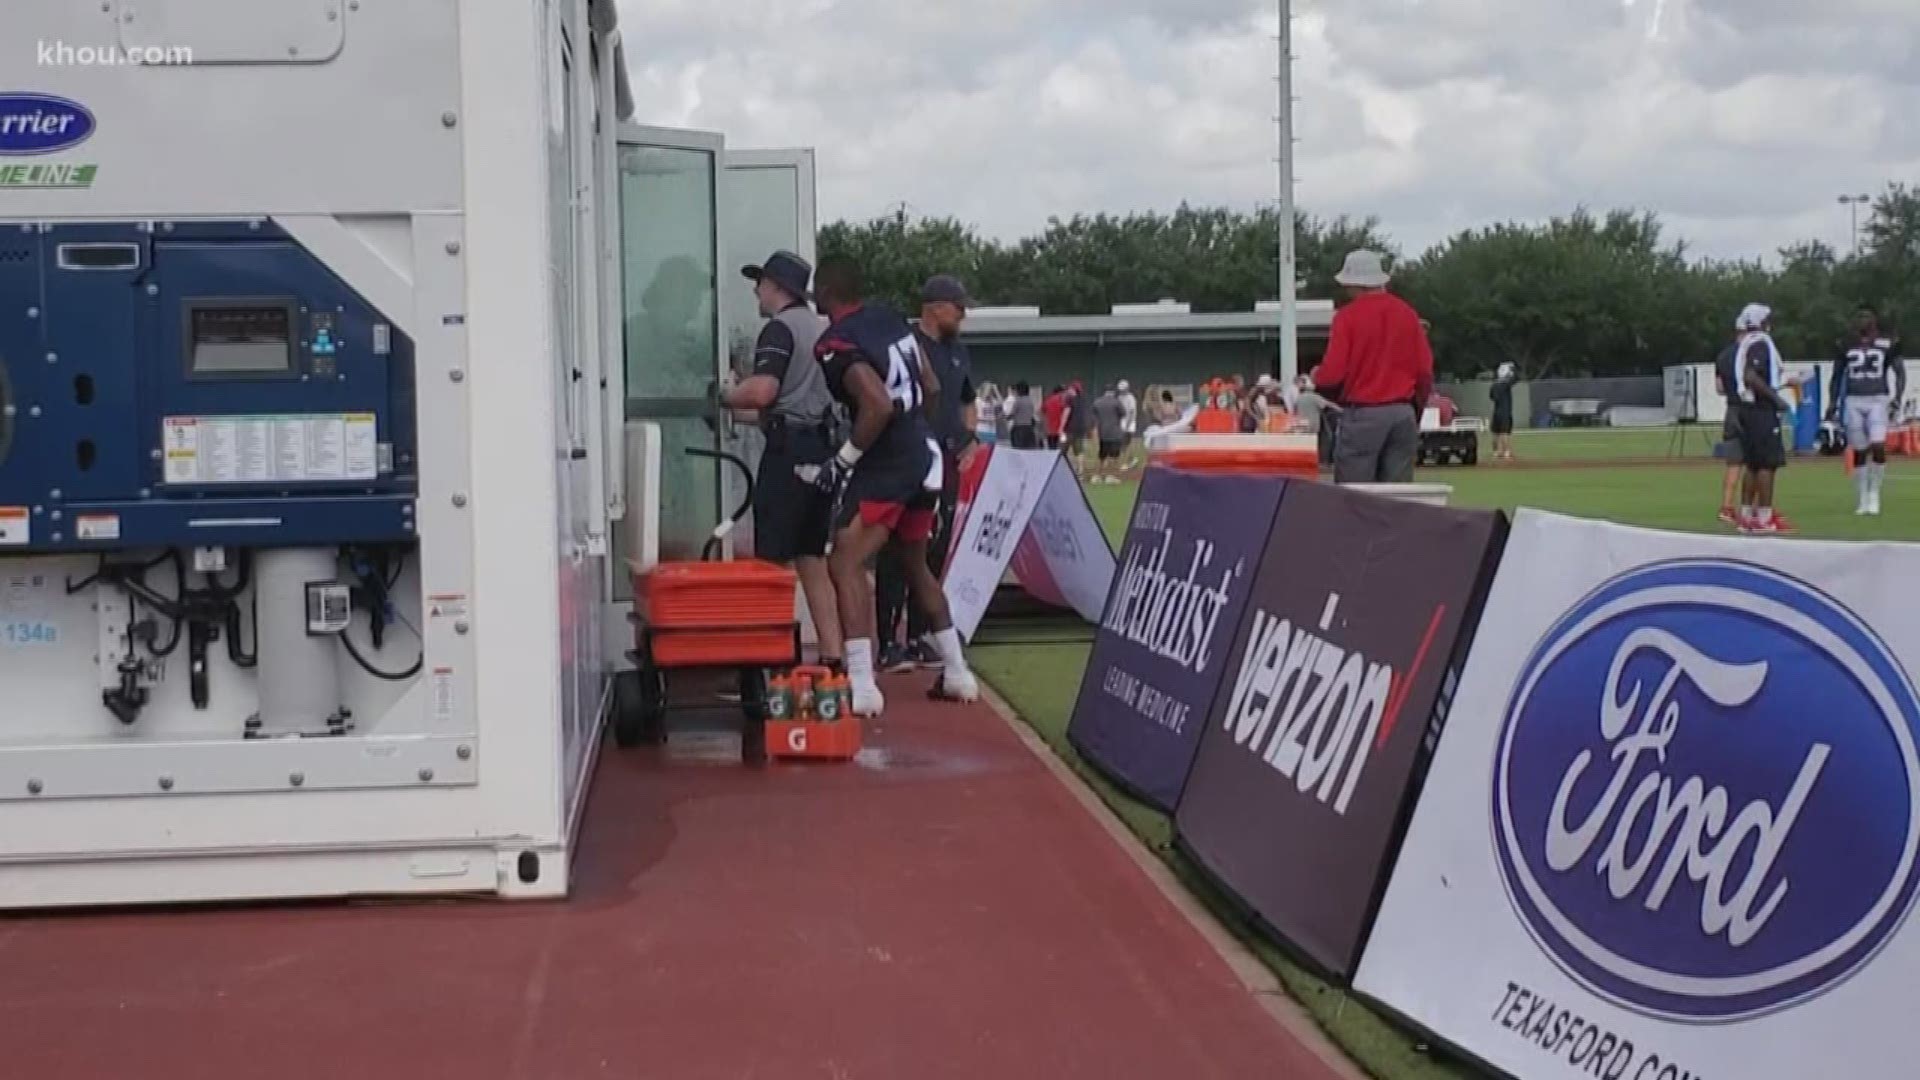 The Texans' new Cooling Tank keeps things a chilly 35 degrees, and players get up to 3 minutes to cool off before getting back on the field. But is it safe?